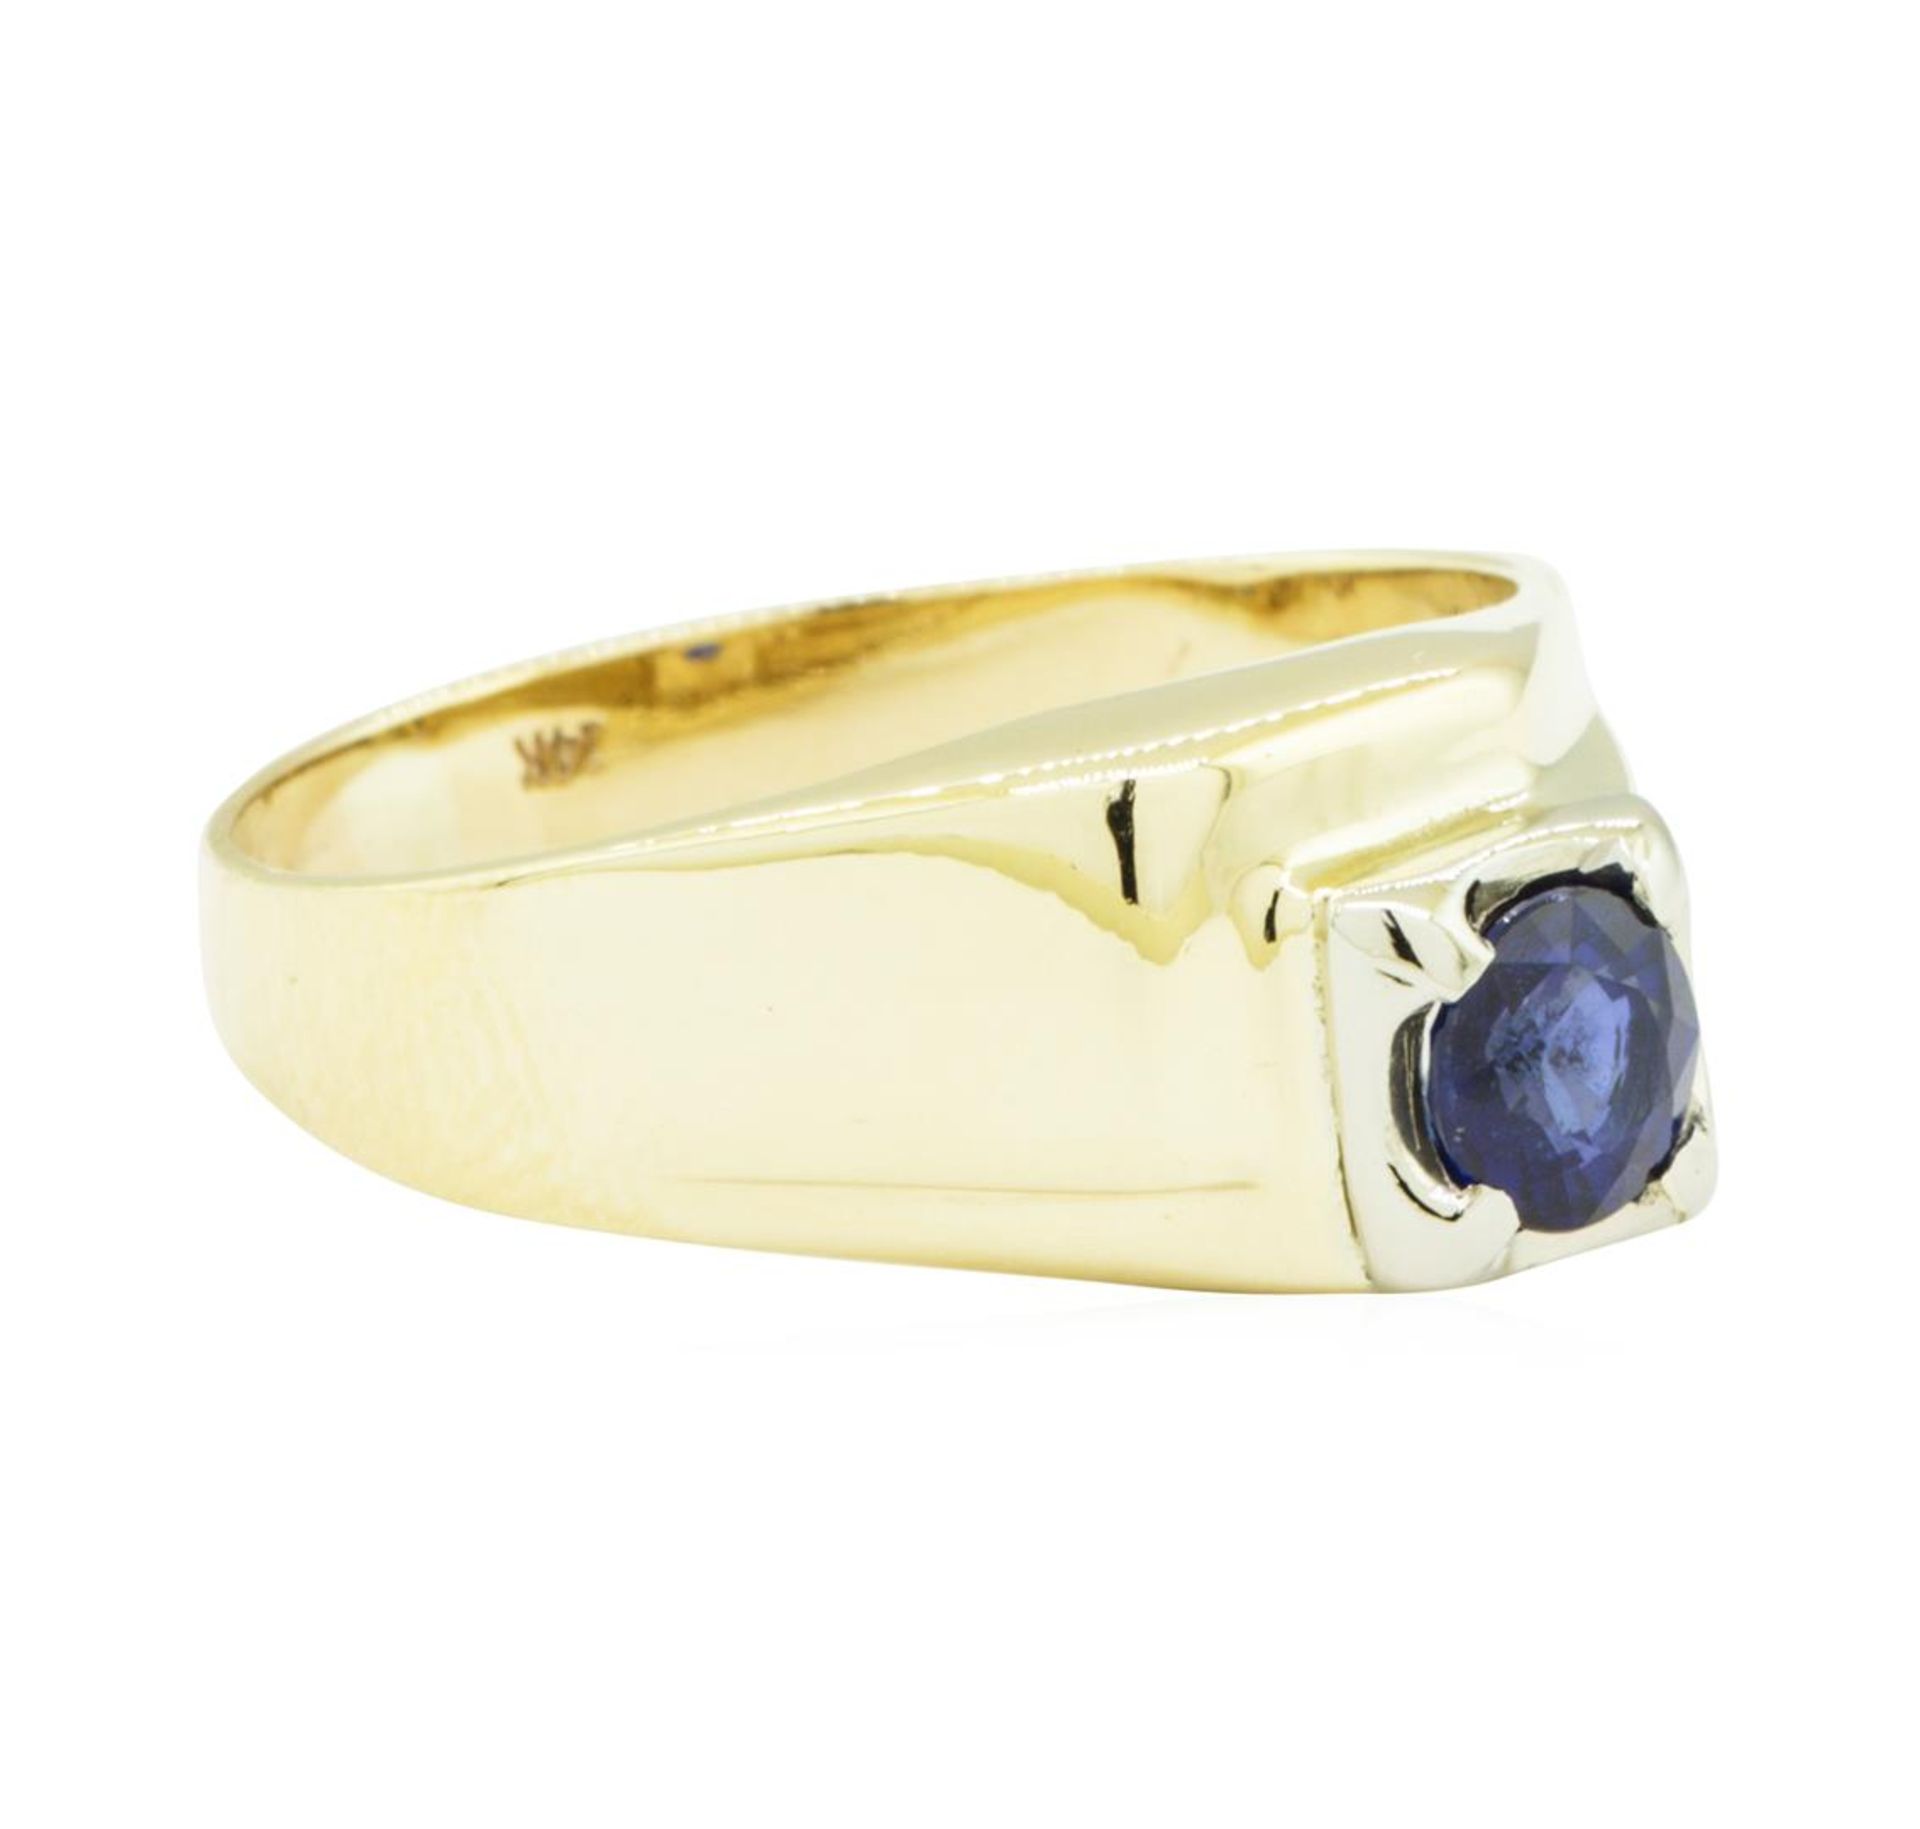 0.99ct Blue Sapphire Ring - 14KT Yellow Gold